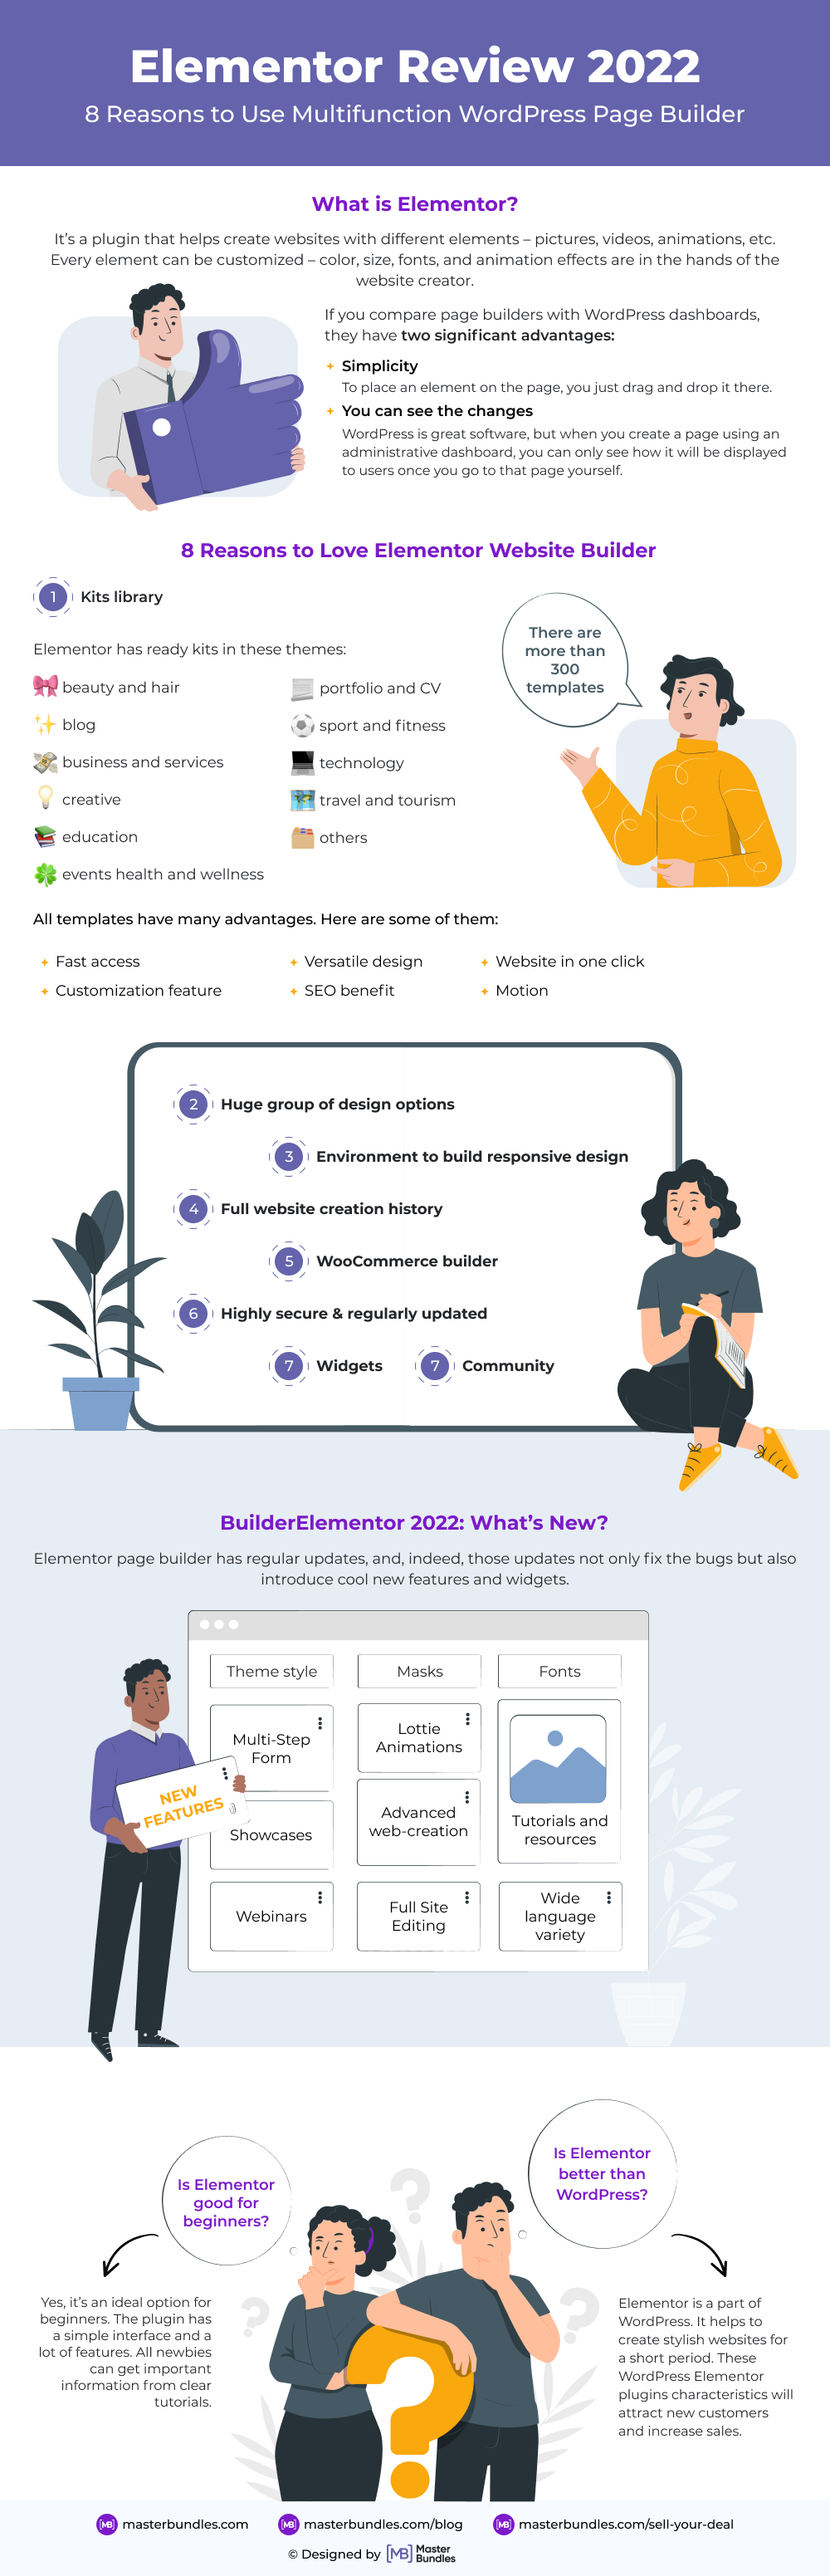 Elementor Review in Infographic.